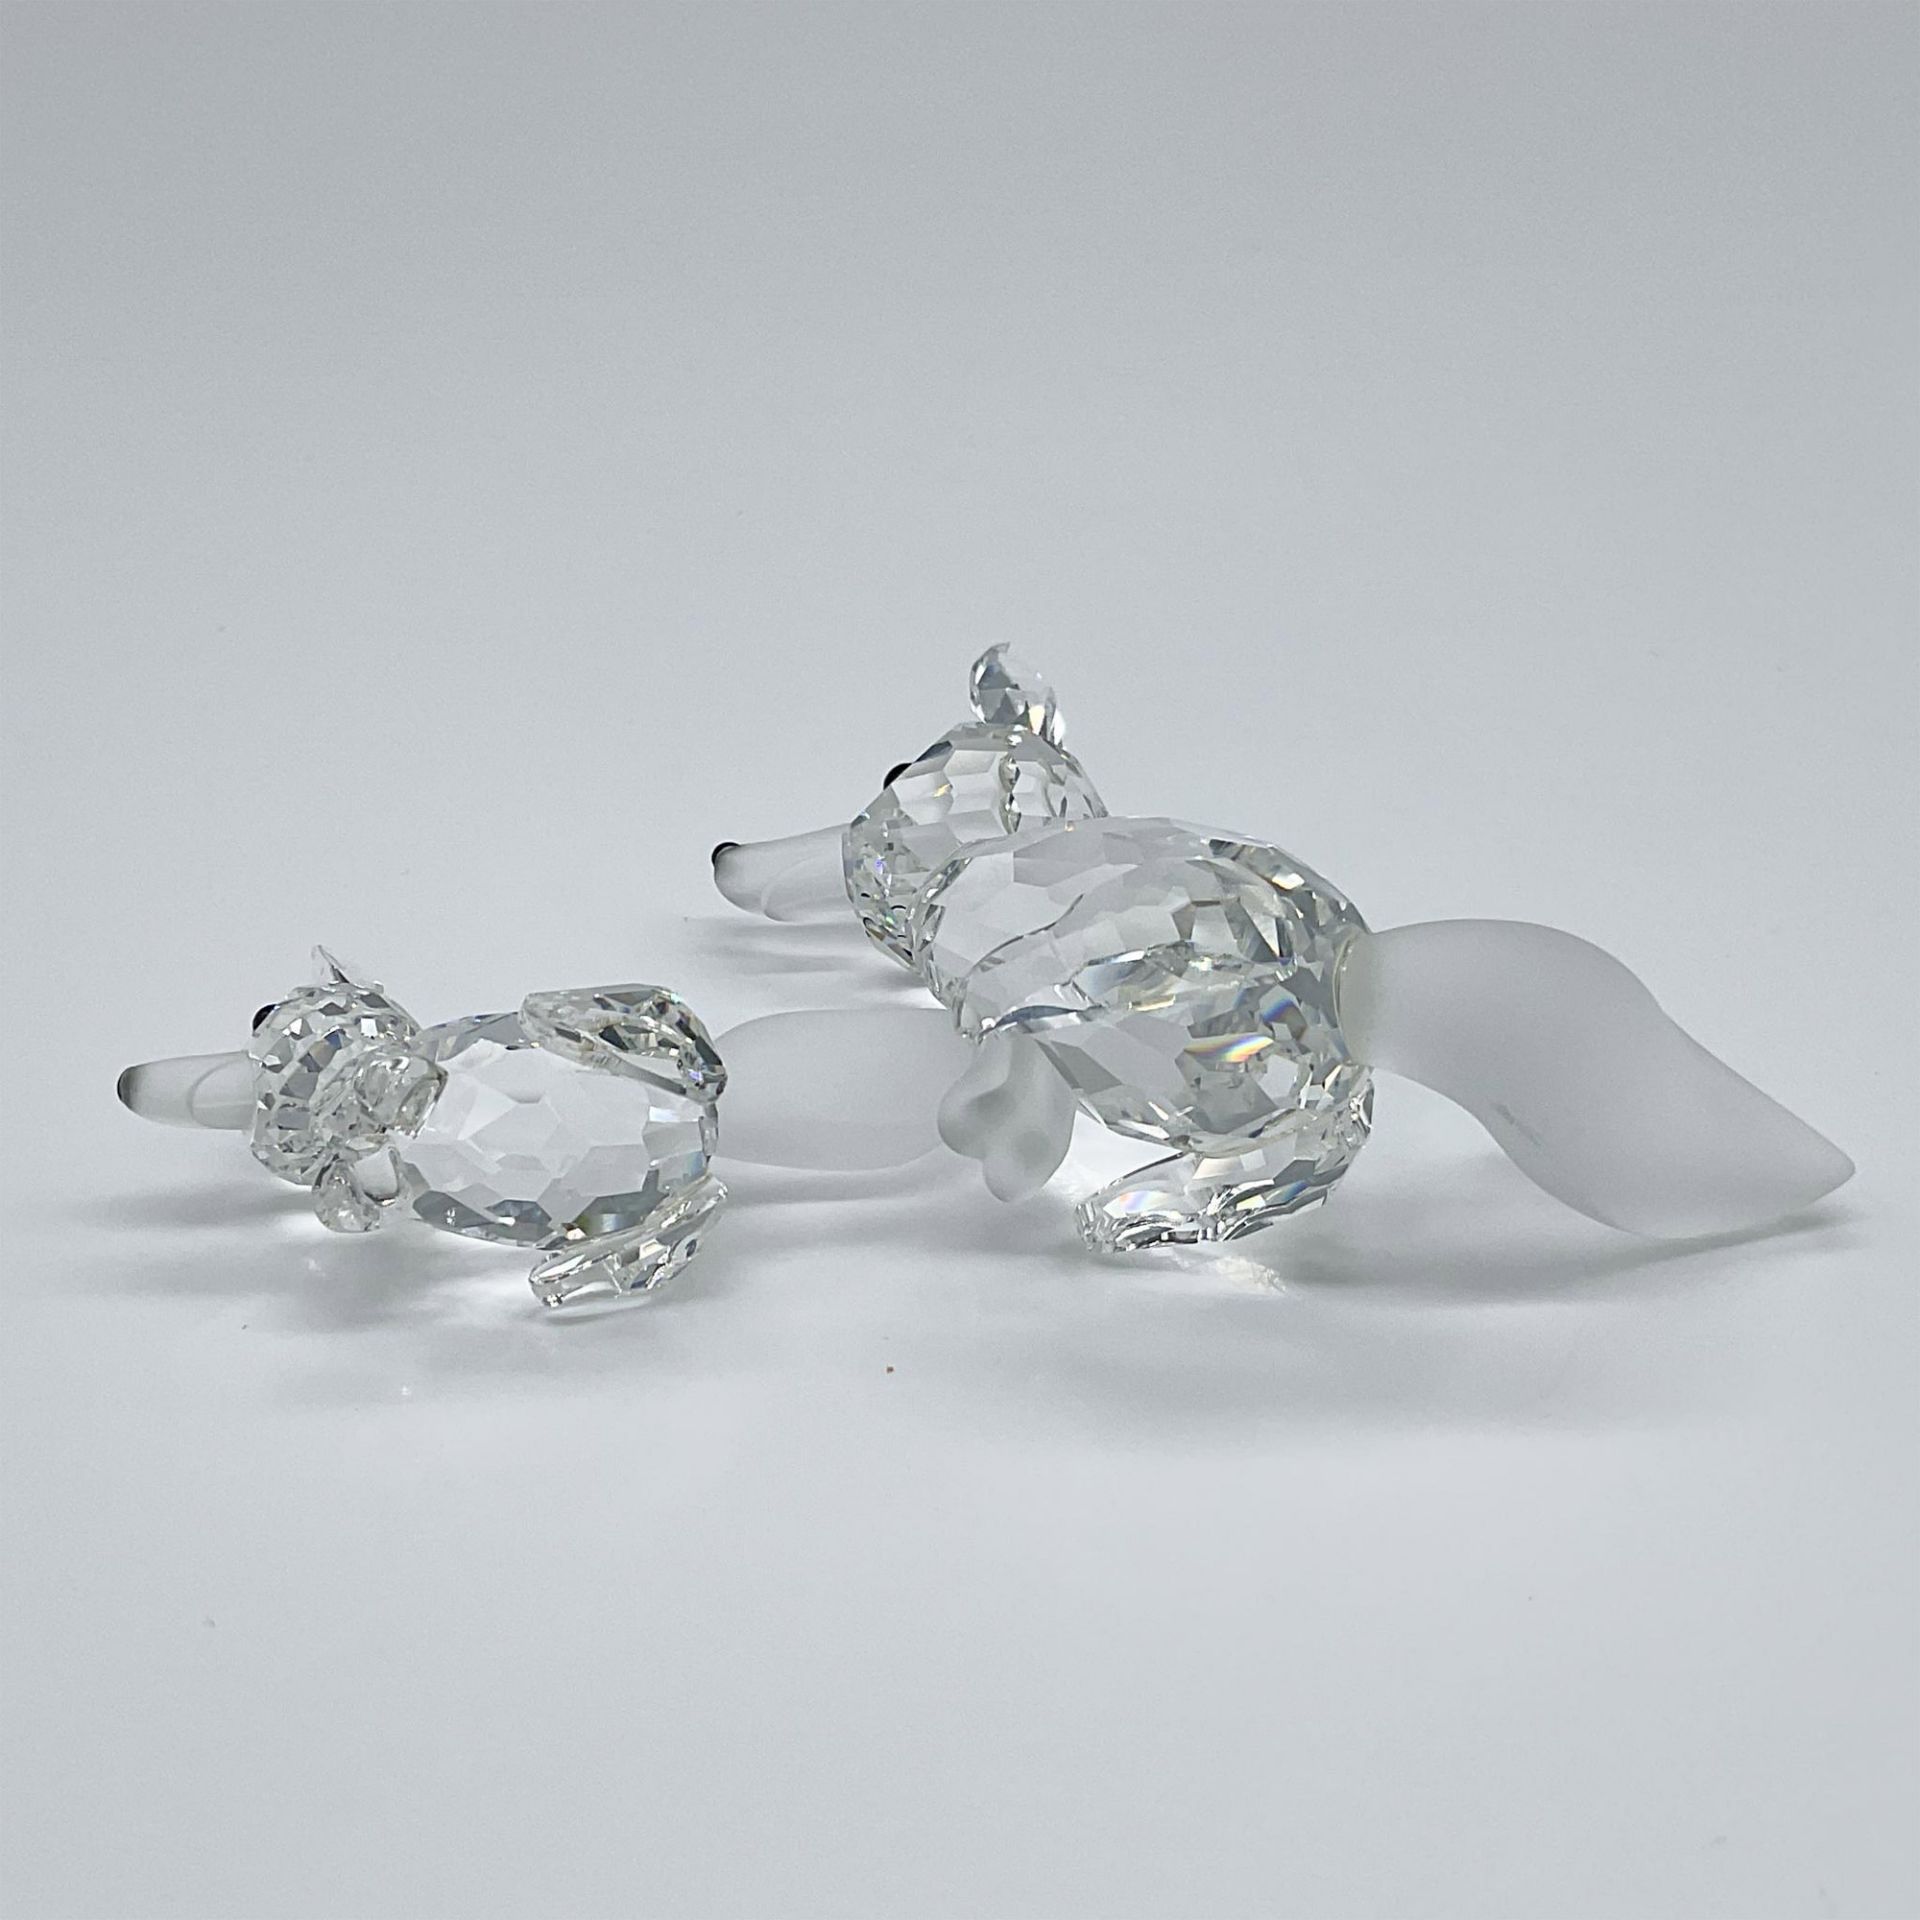 2pc Swarovski Silver Crystal Figurines, Foxes - Image 3 of 4